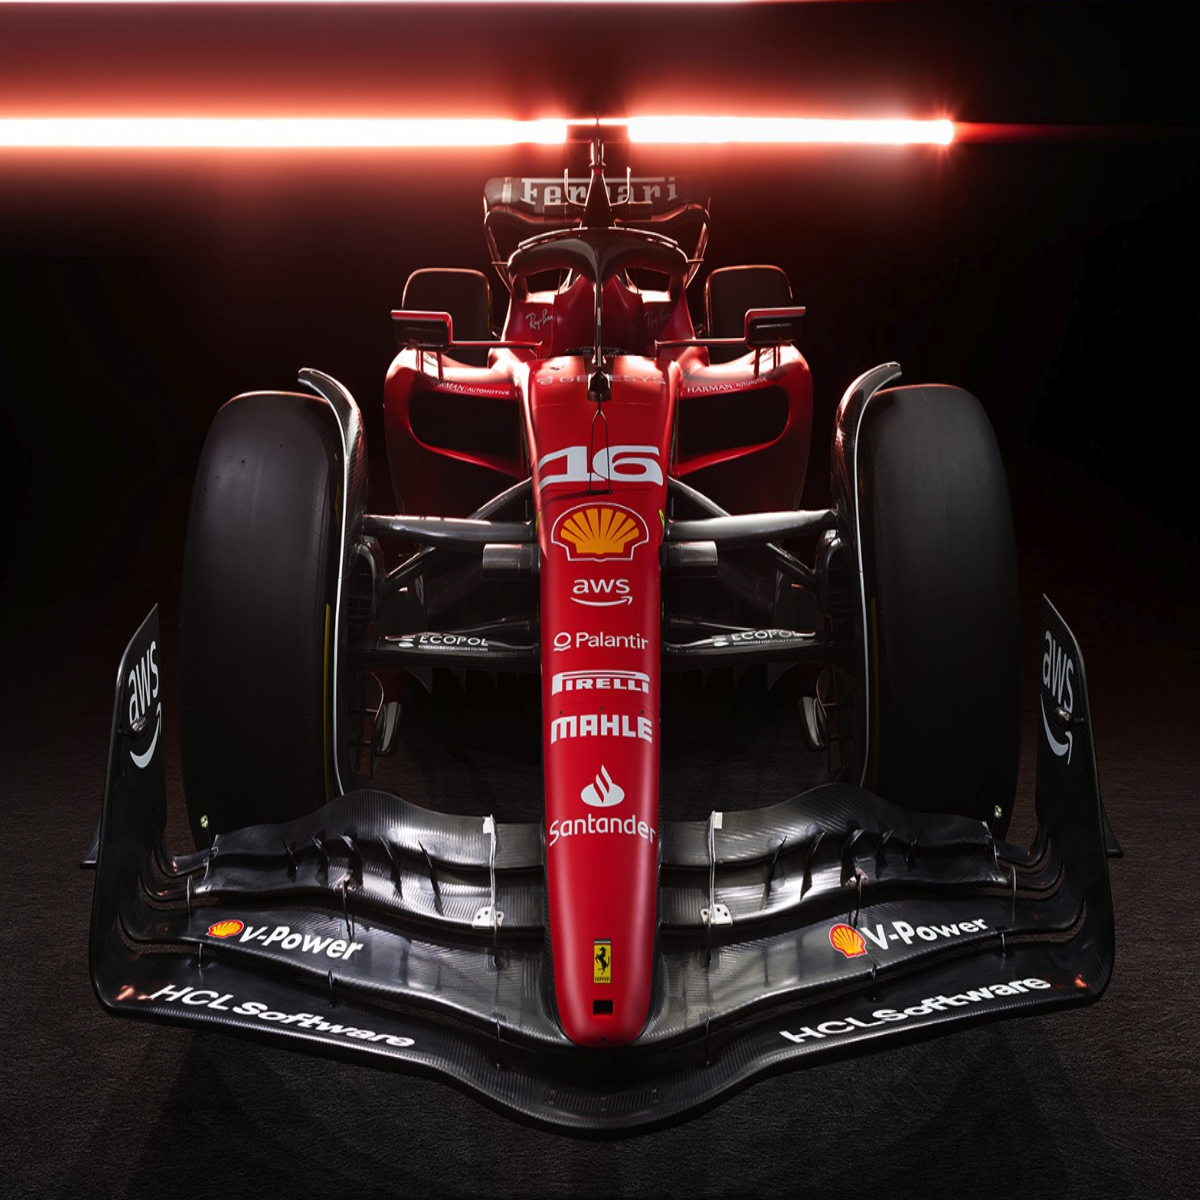 Ferrari Reveal 2023 F1 SF 23 Car And Livery At Launch In Maranello With Charles Leclerc Driving Car On Track